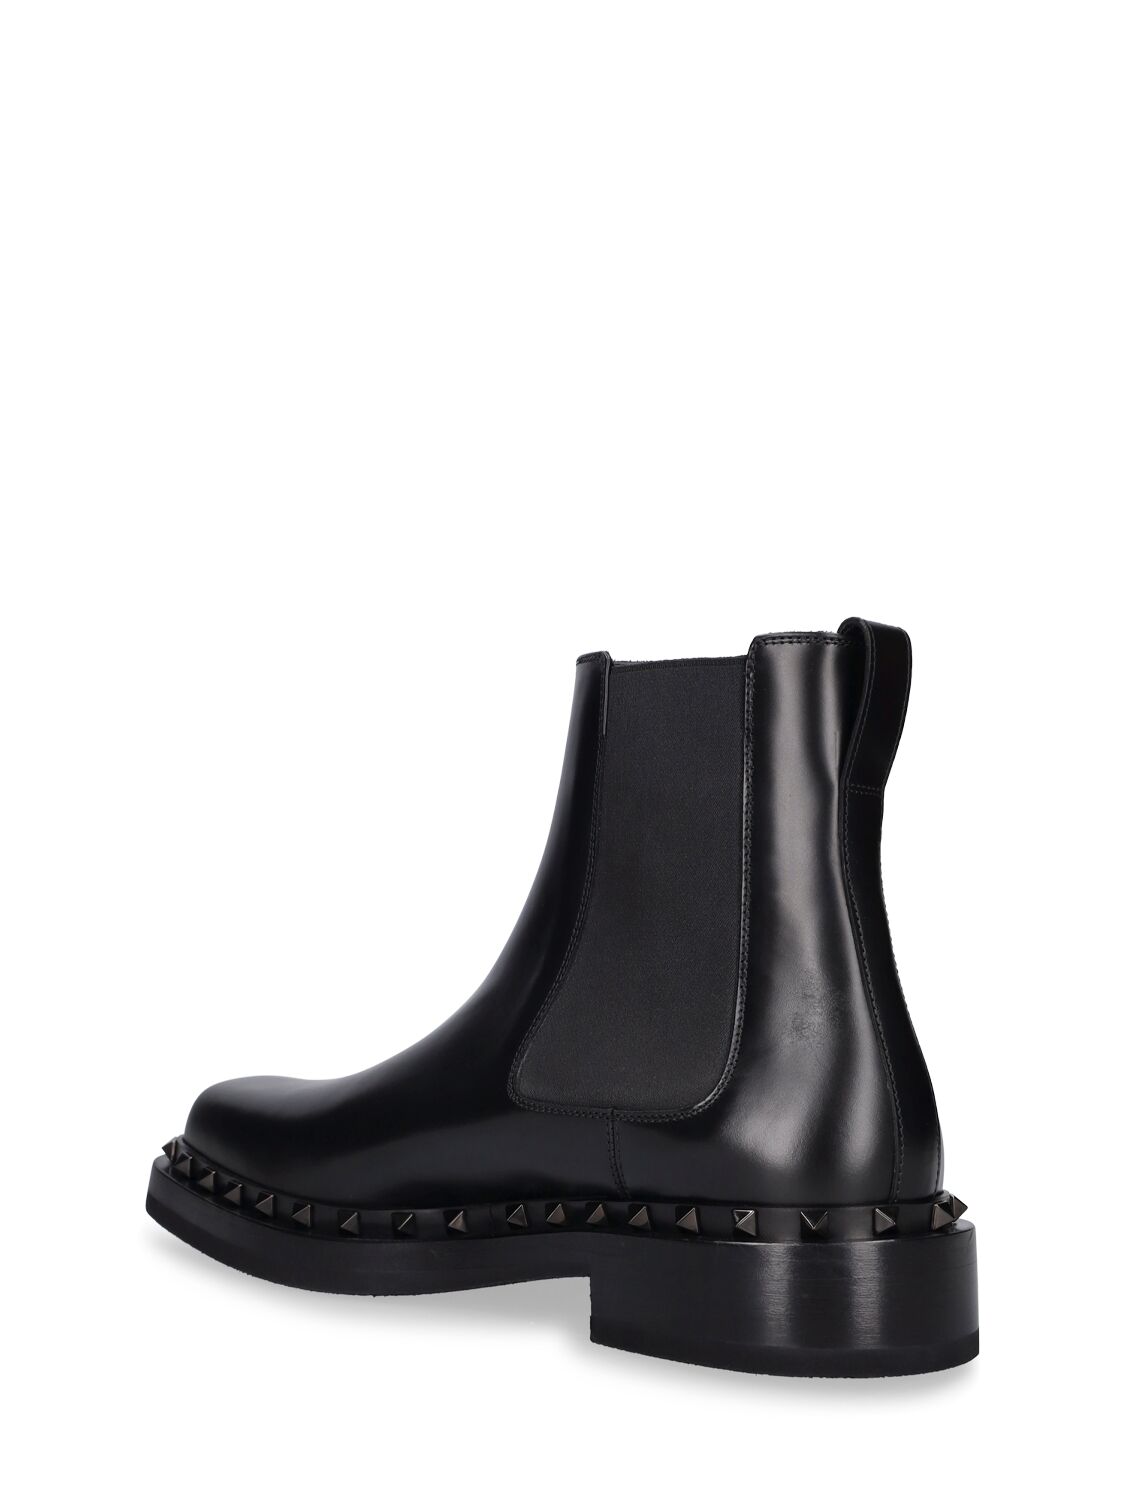 Shop Valentino 35mm Rockstud Beatle Leather Boots In Black